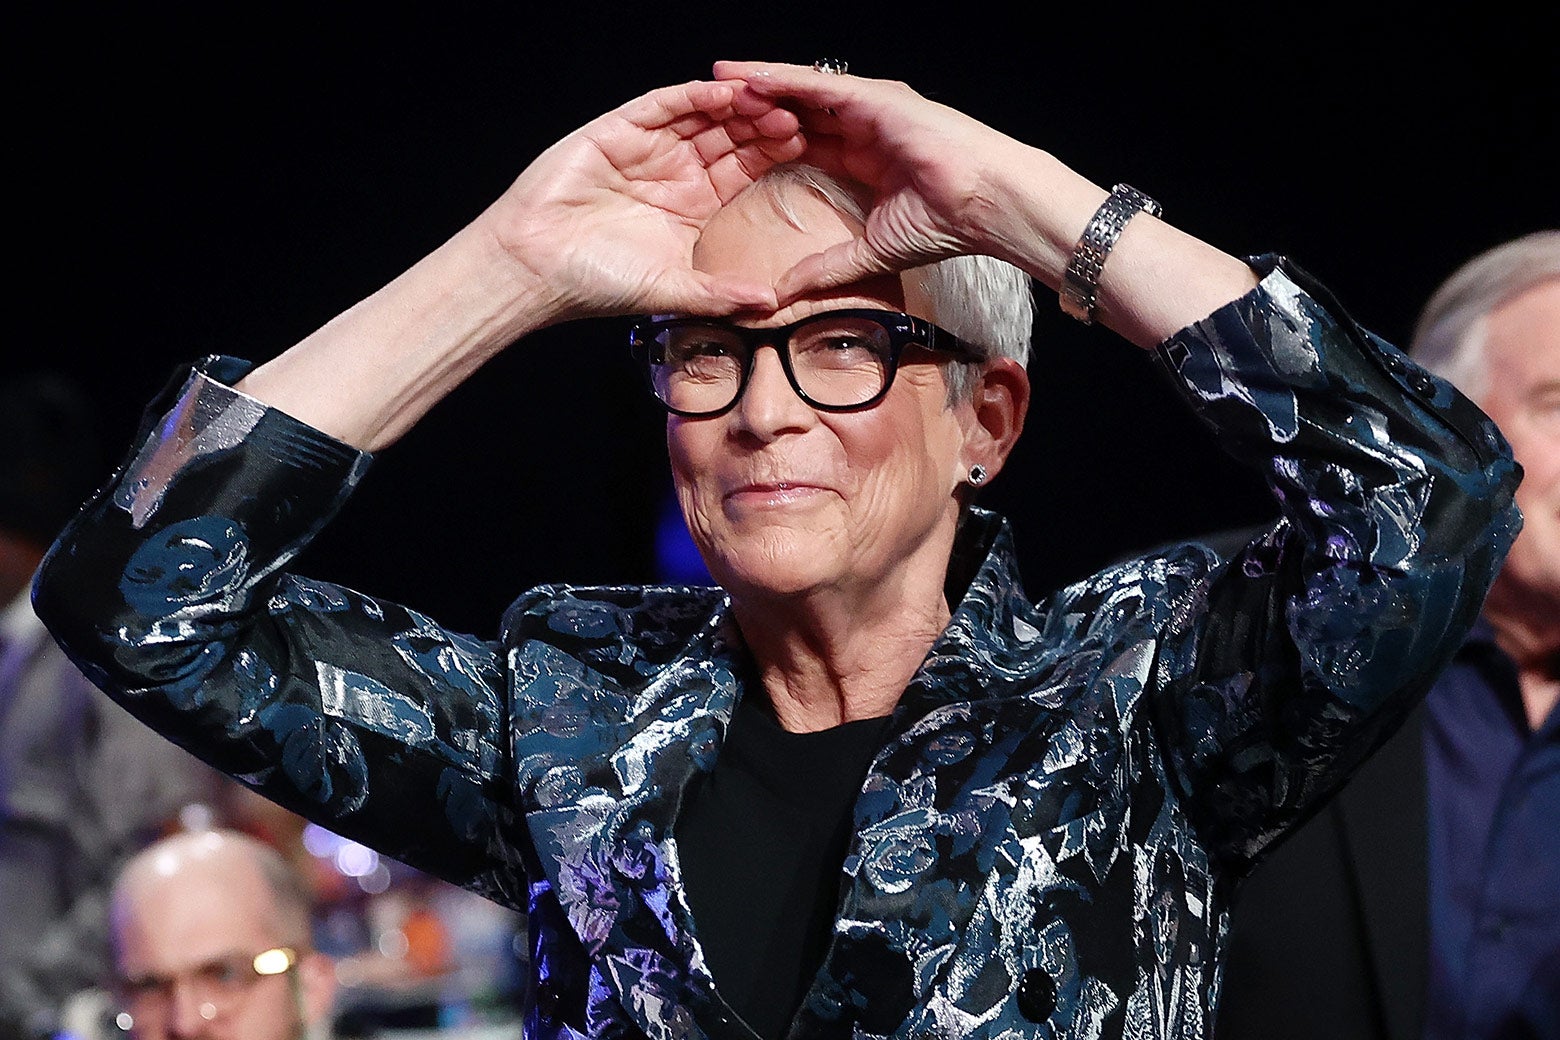 Jamie Lee Curtis holds her hands up on her forehead.